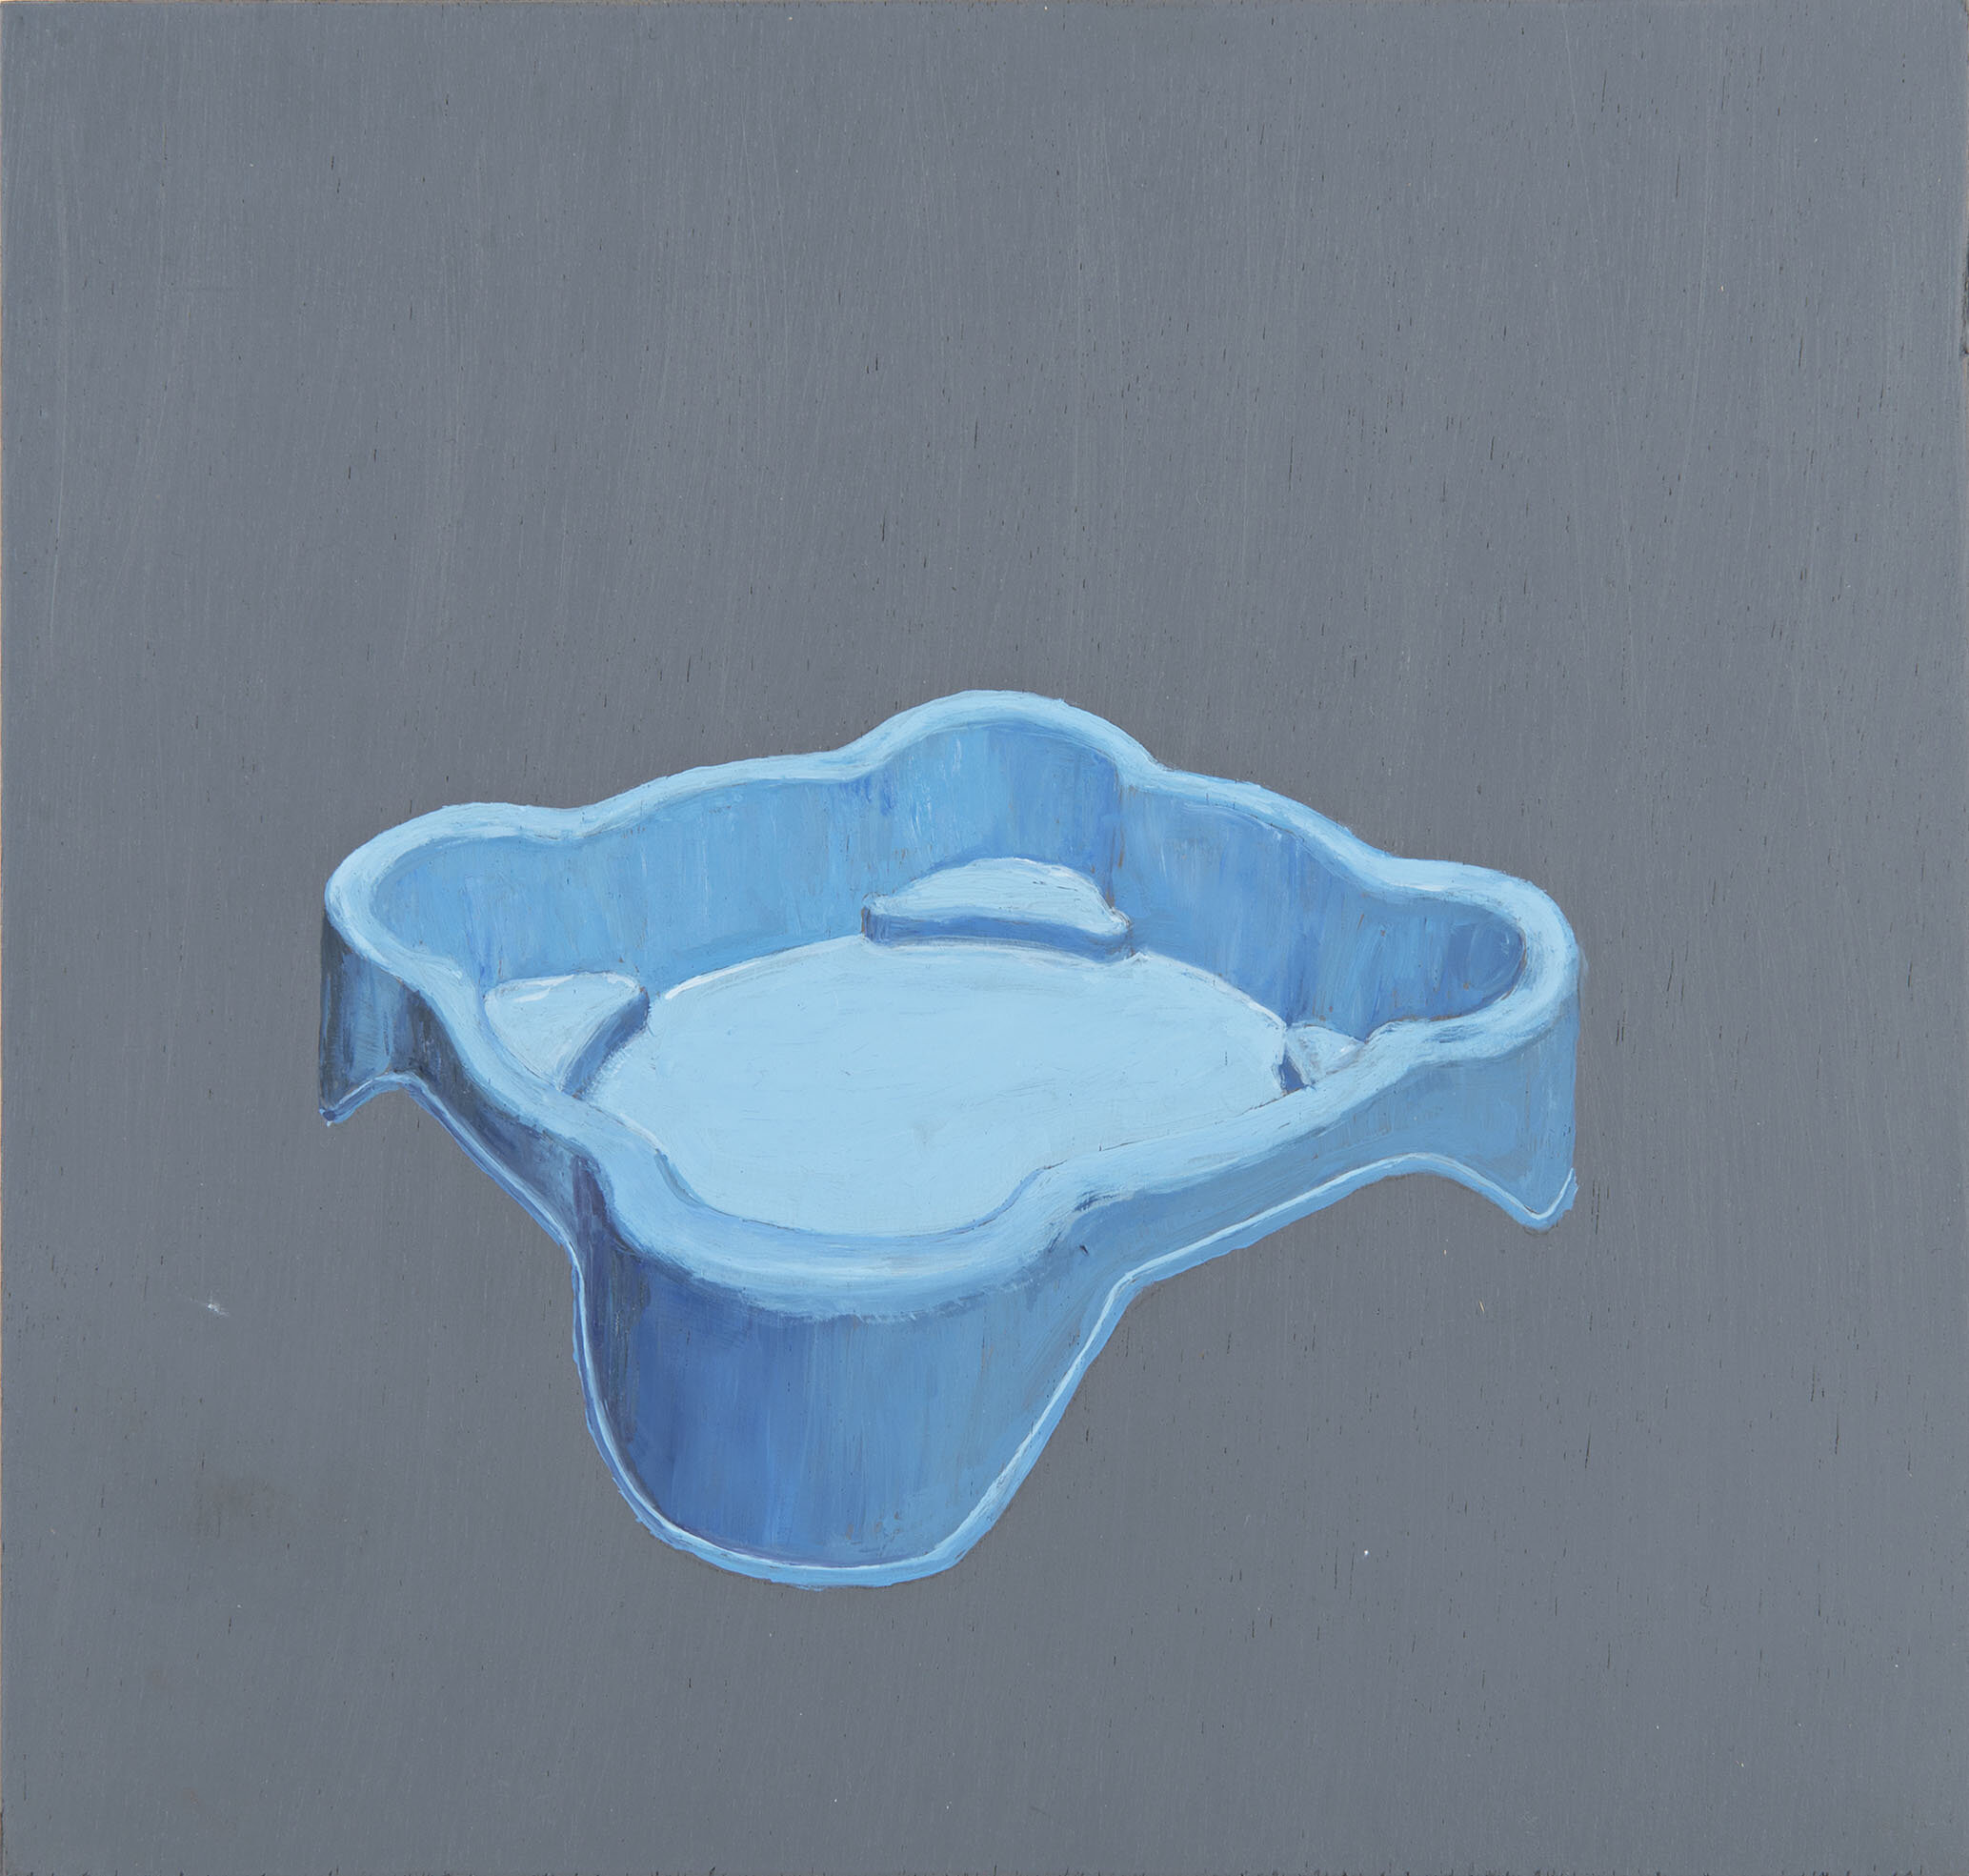 Blue Pool (Containment Series), 2016, Oil on Plywood, 27.5. x 28.5 cm